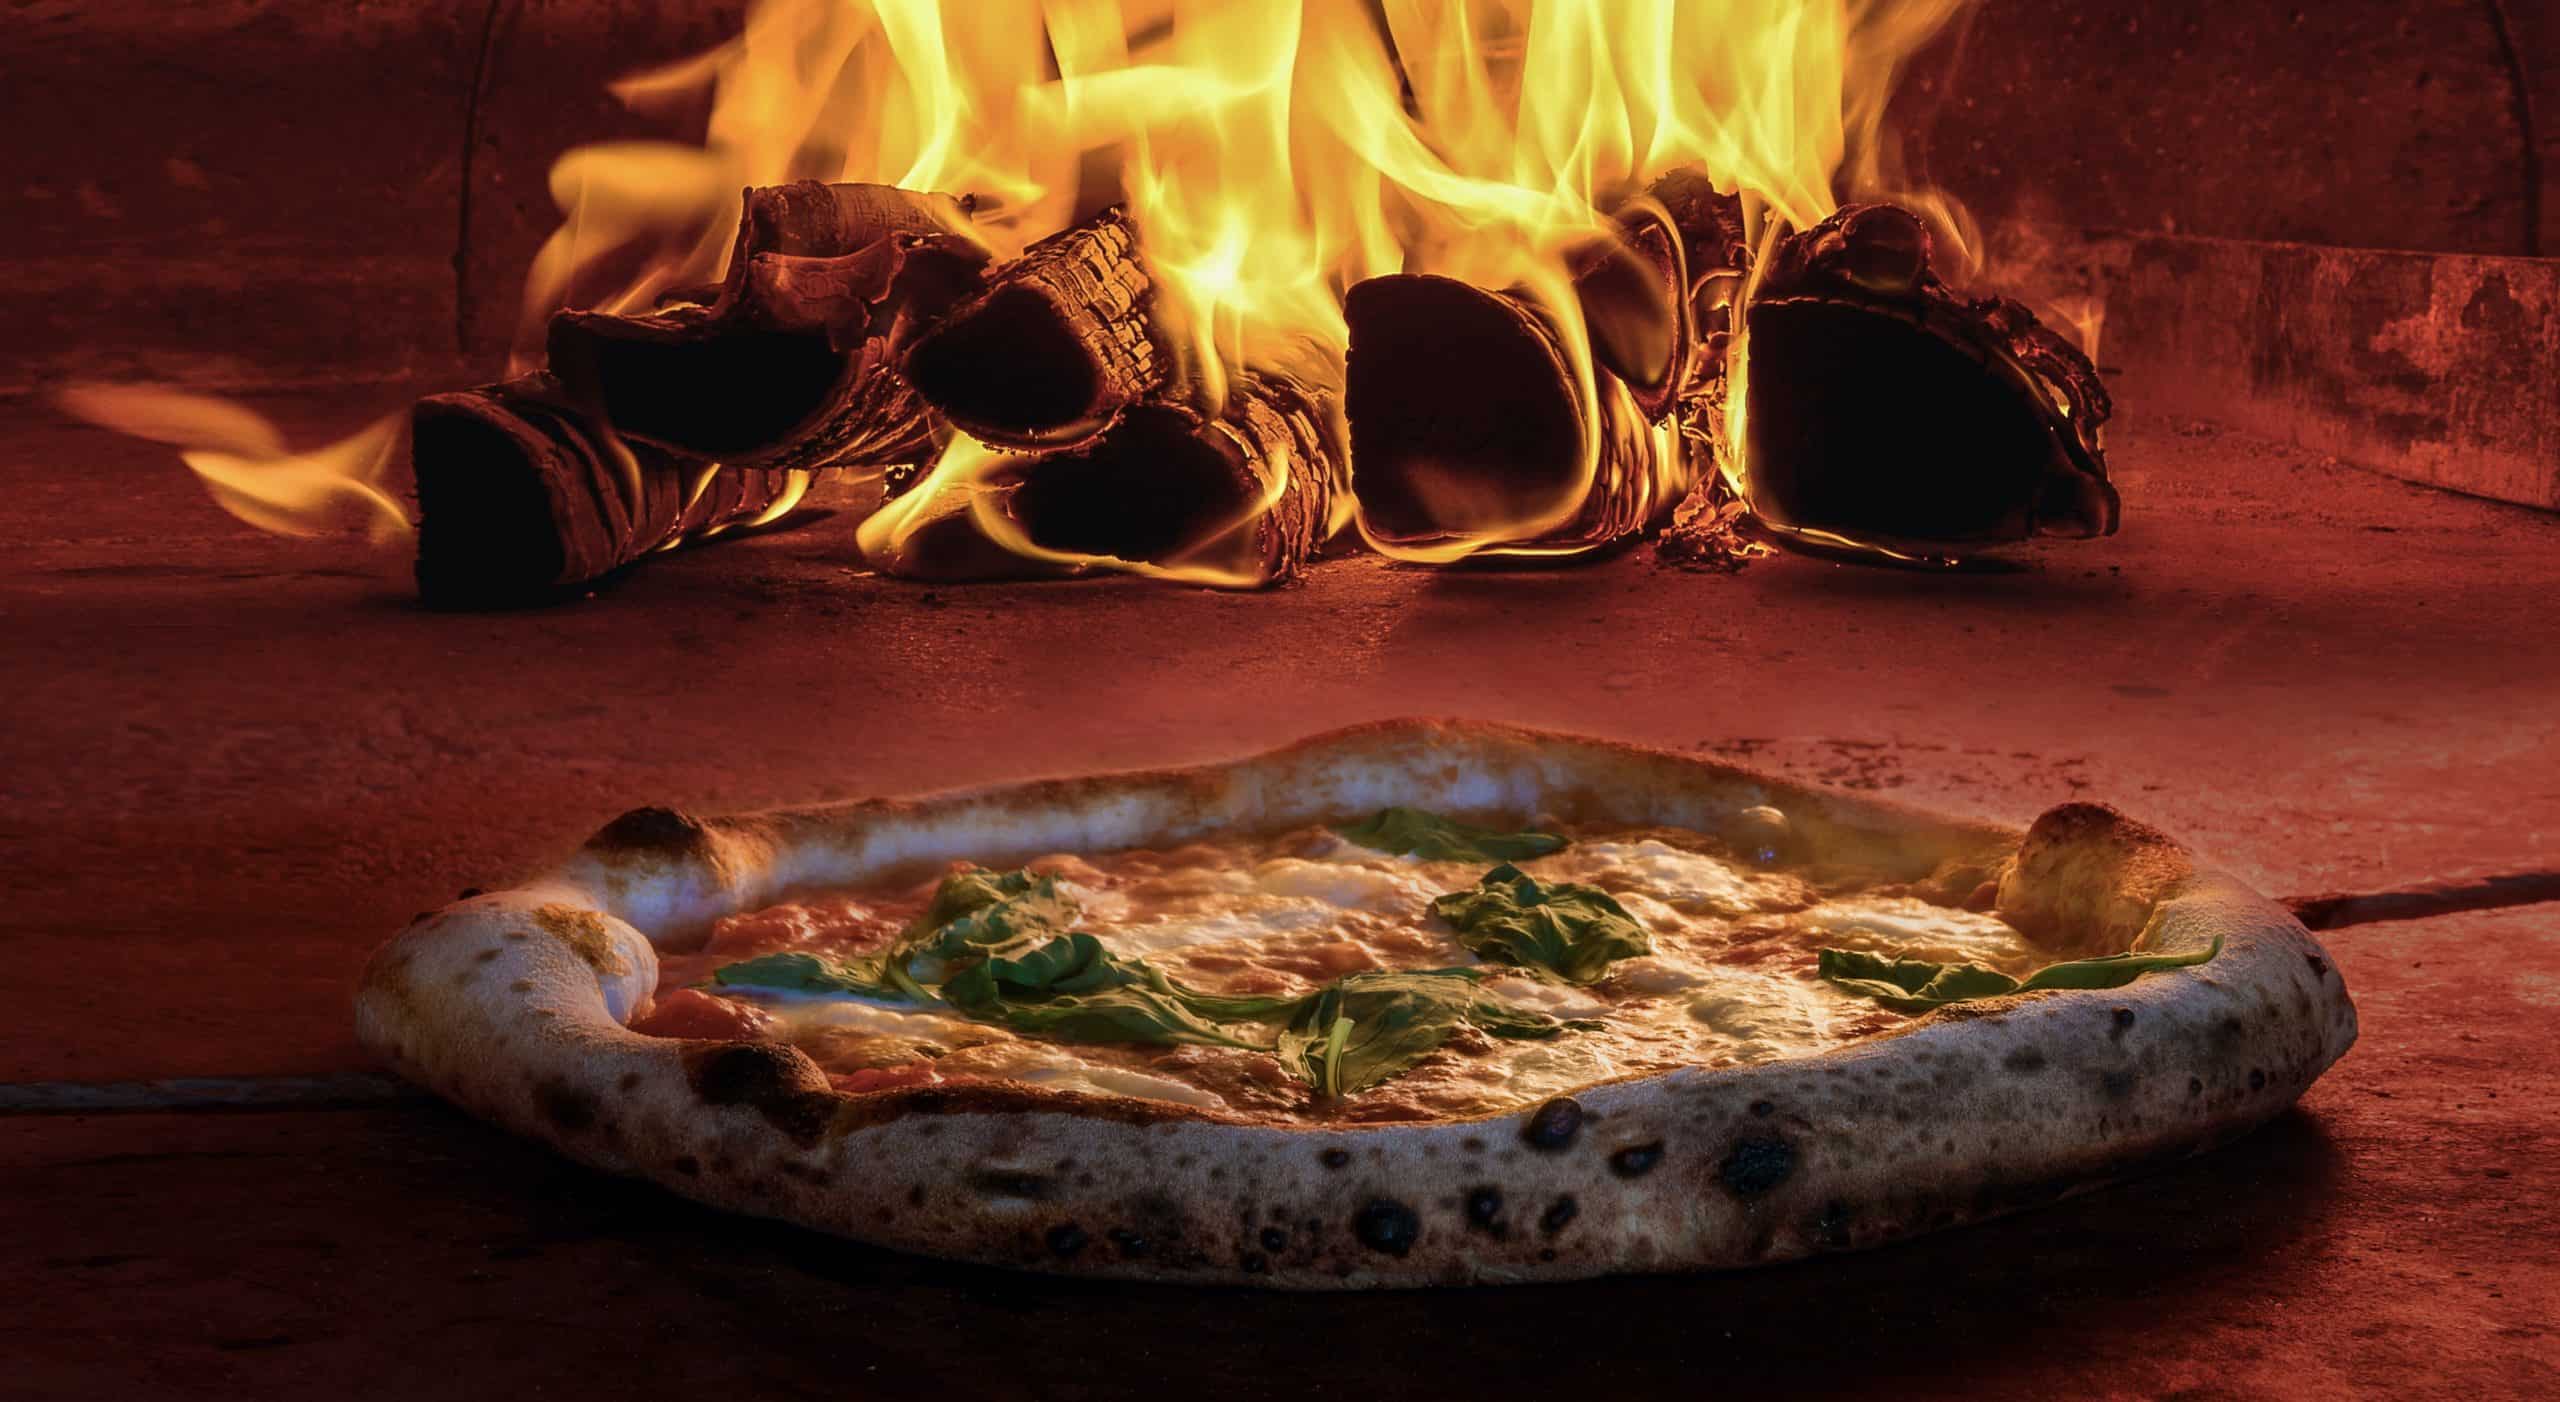 pizza oven using kindling wood sticks to burn and cook pizza